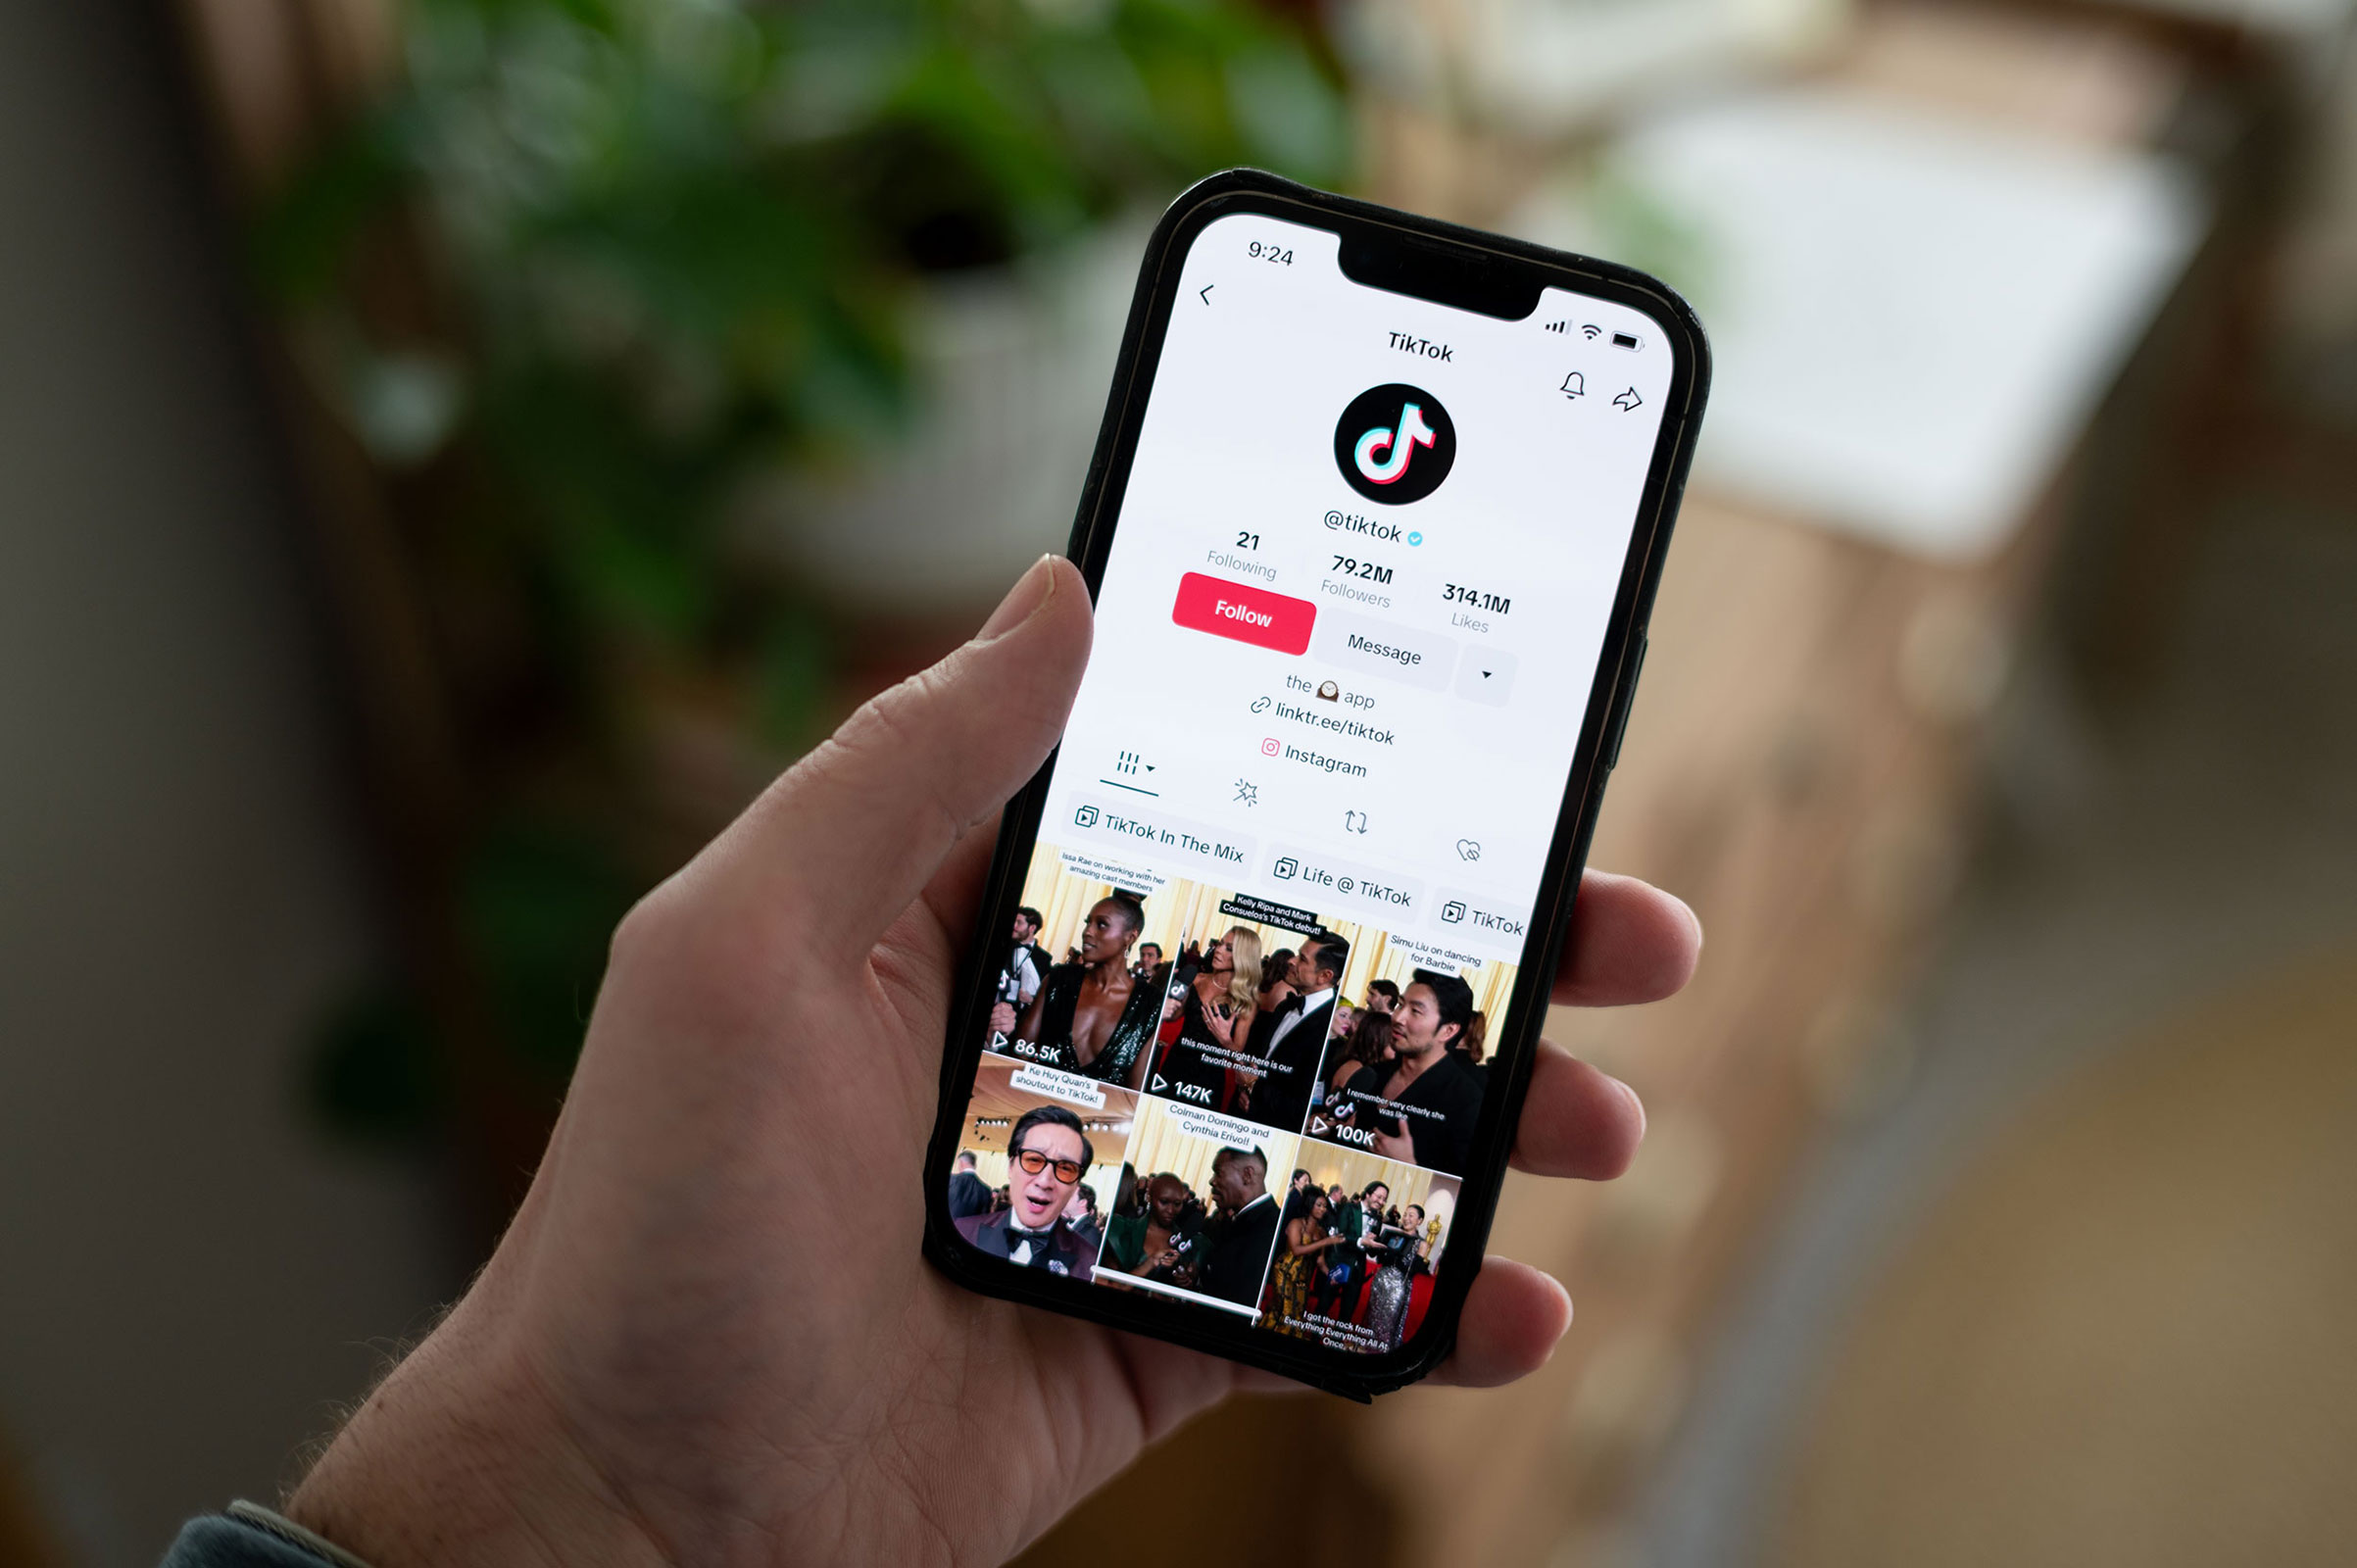 The US House of Representatives is set to vote on legislation that would ban TikTok, a major challenge to one of the world’s most popular social media apps used by 170 million Americans, unless it part ways with its China-linked parent company, ByteDance.